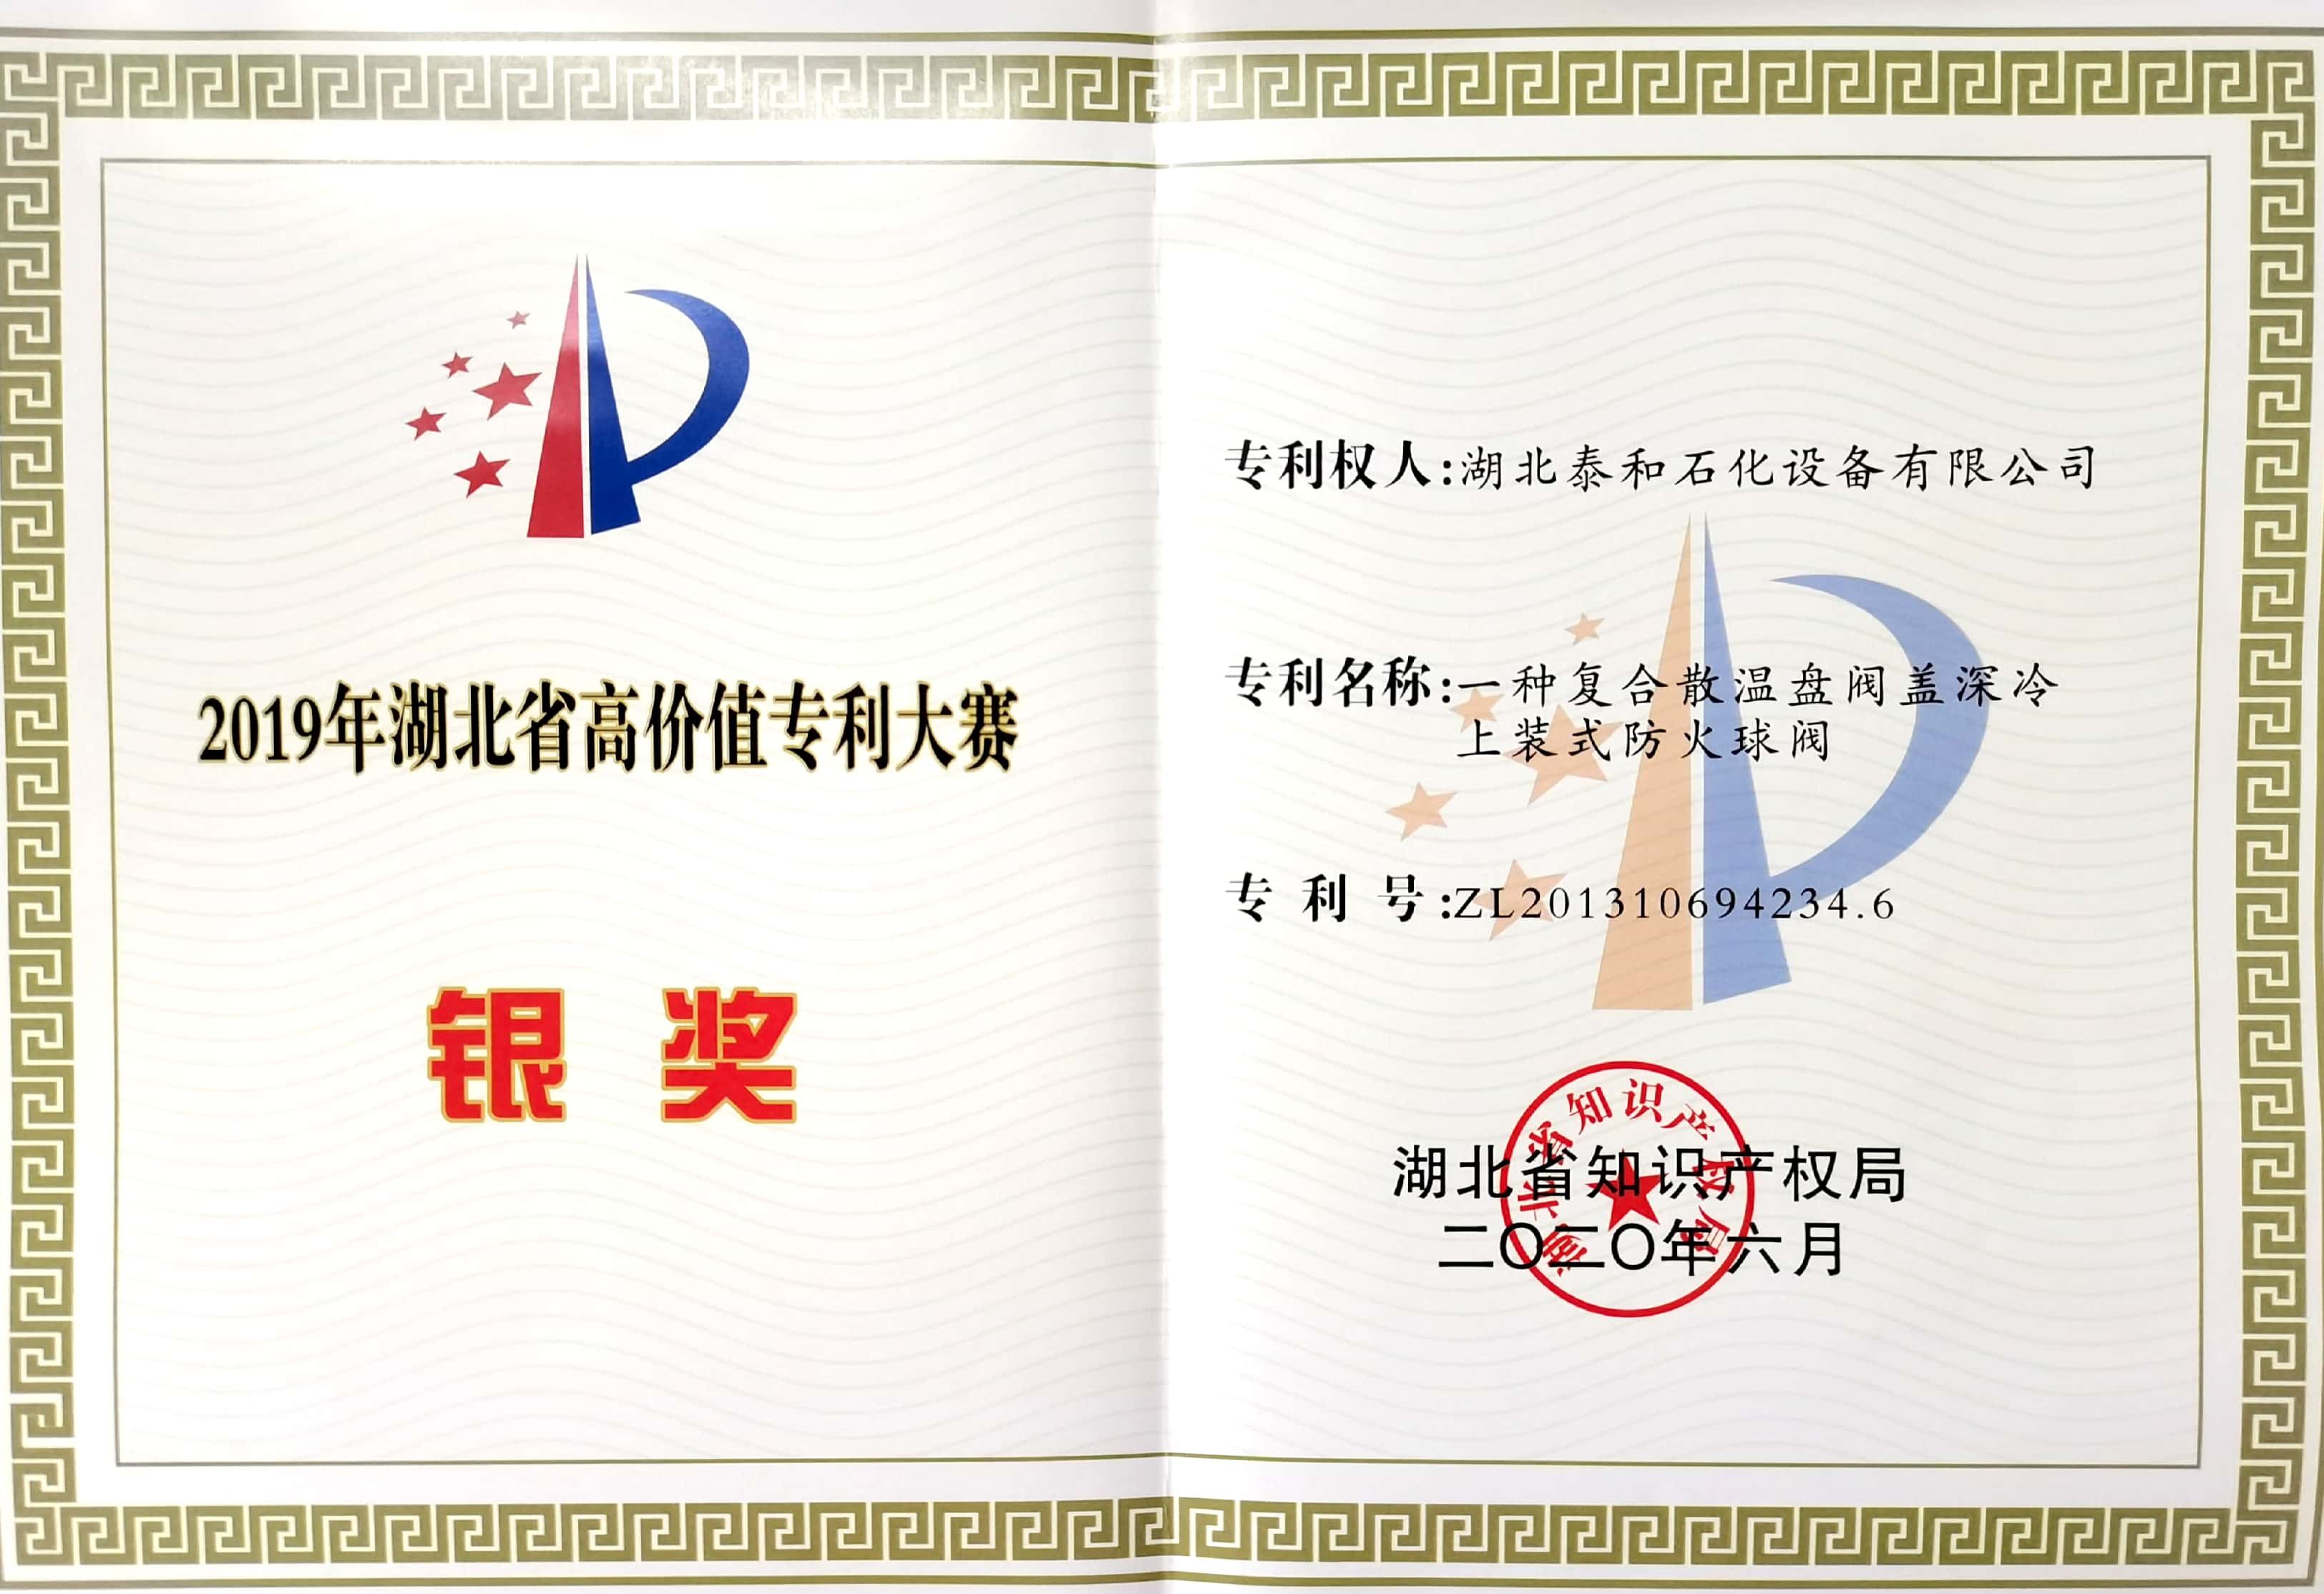 2019 High Value Patent Silver Award